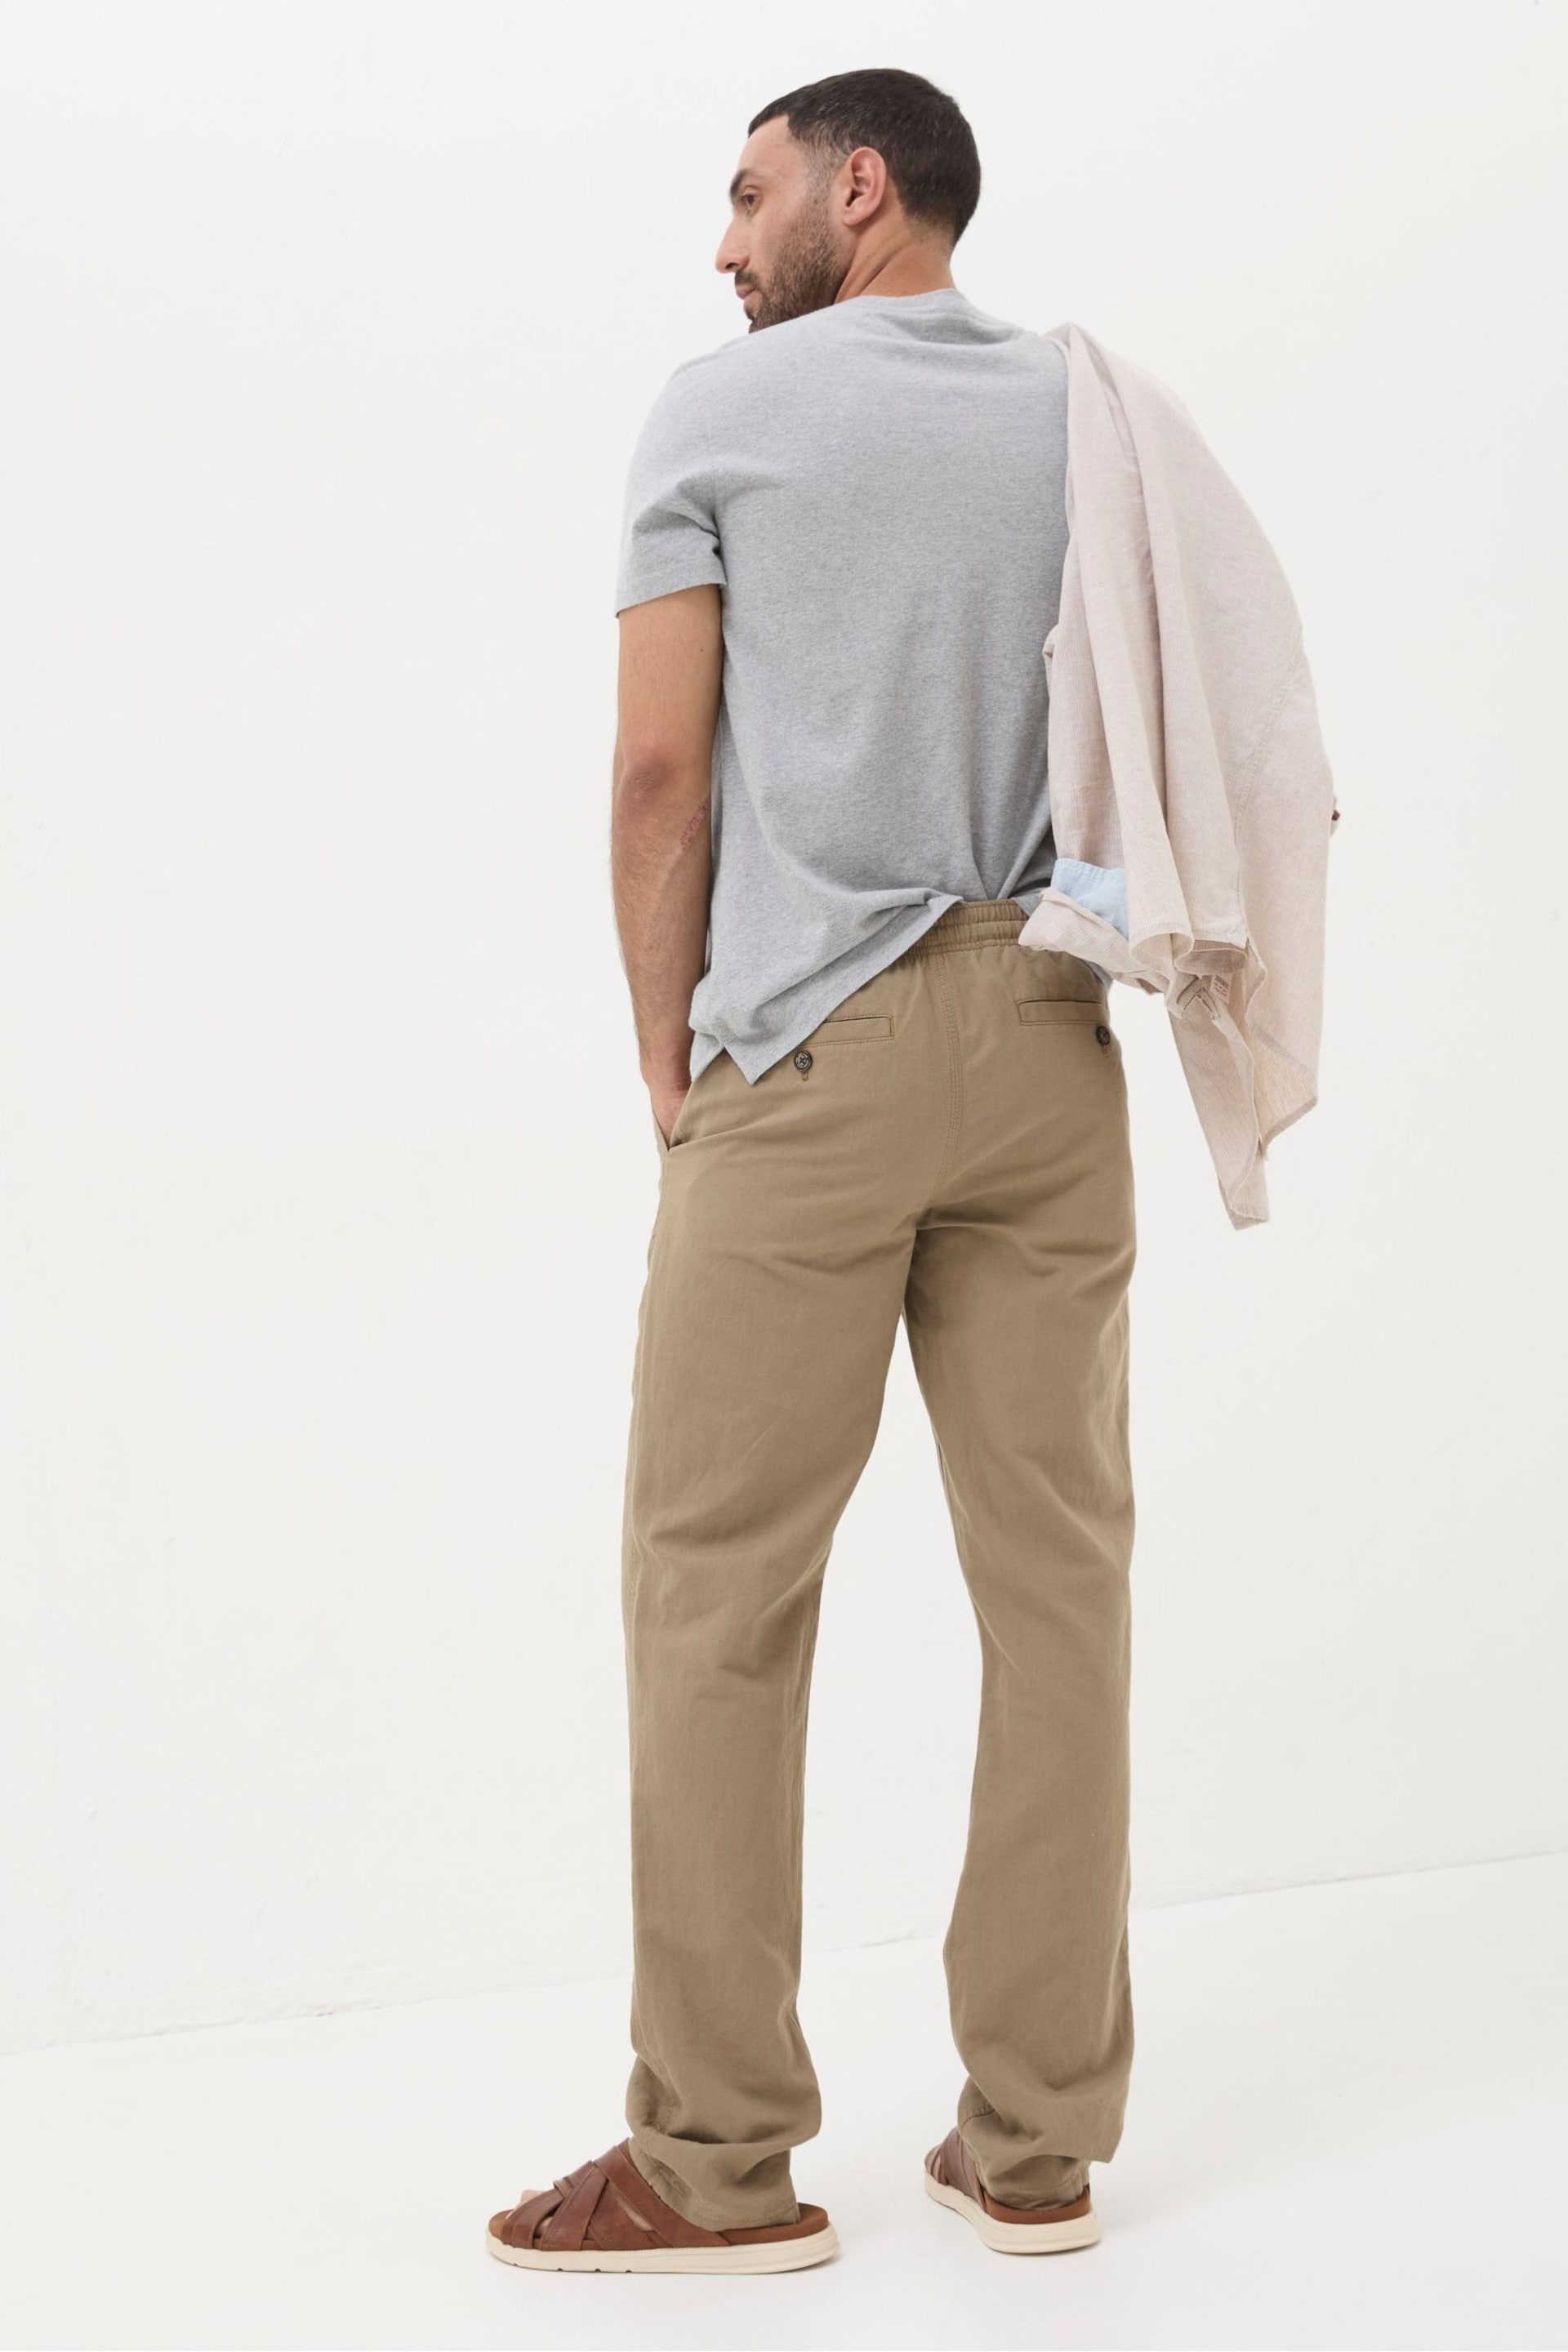 FatFace Natural Straight Cotton Linen Trousers - Image 2 of 5